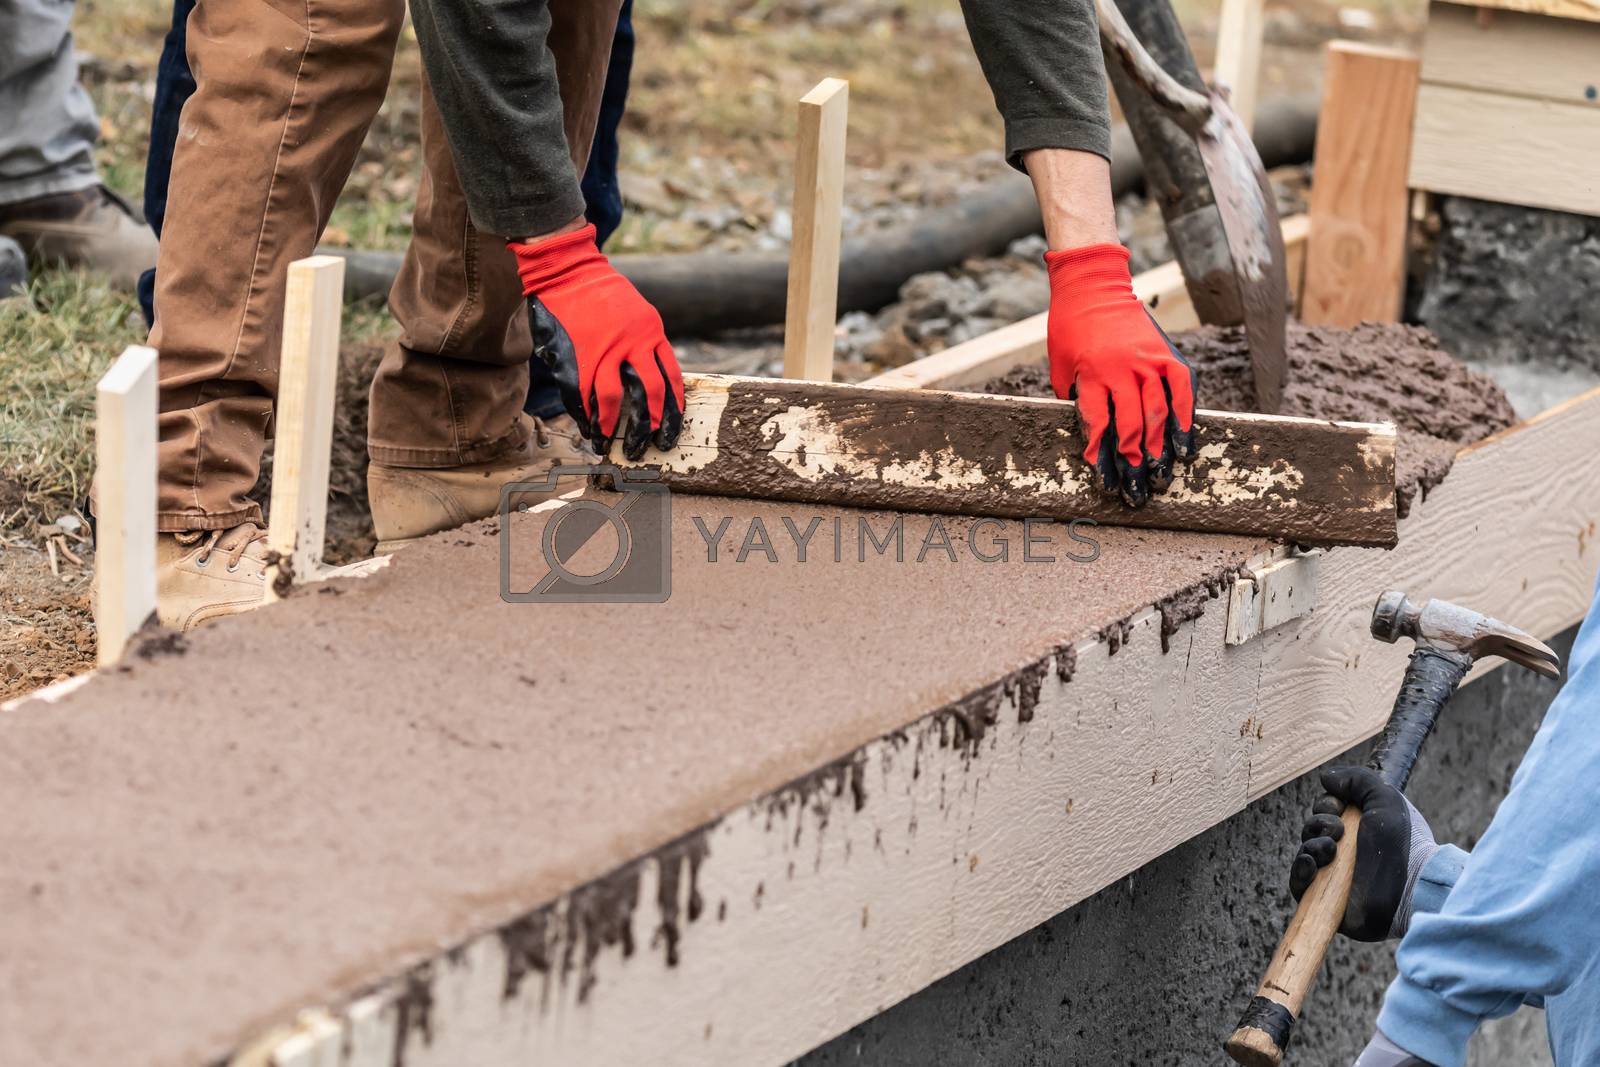 Royalty free image of Construction Worker Leveling Wet Cement Into Wood Framing by Feverpitched